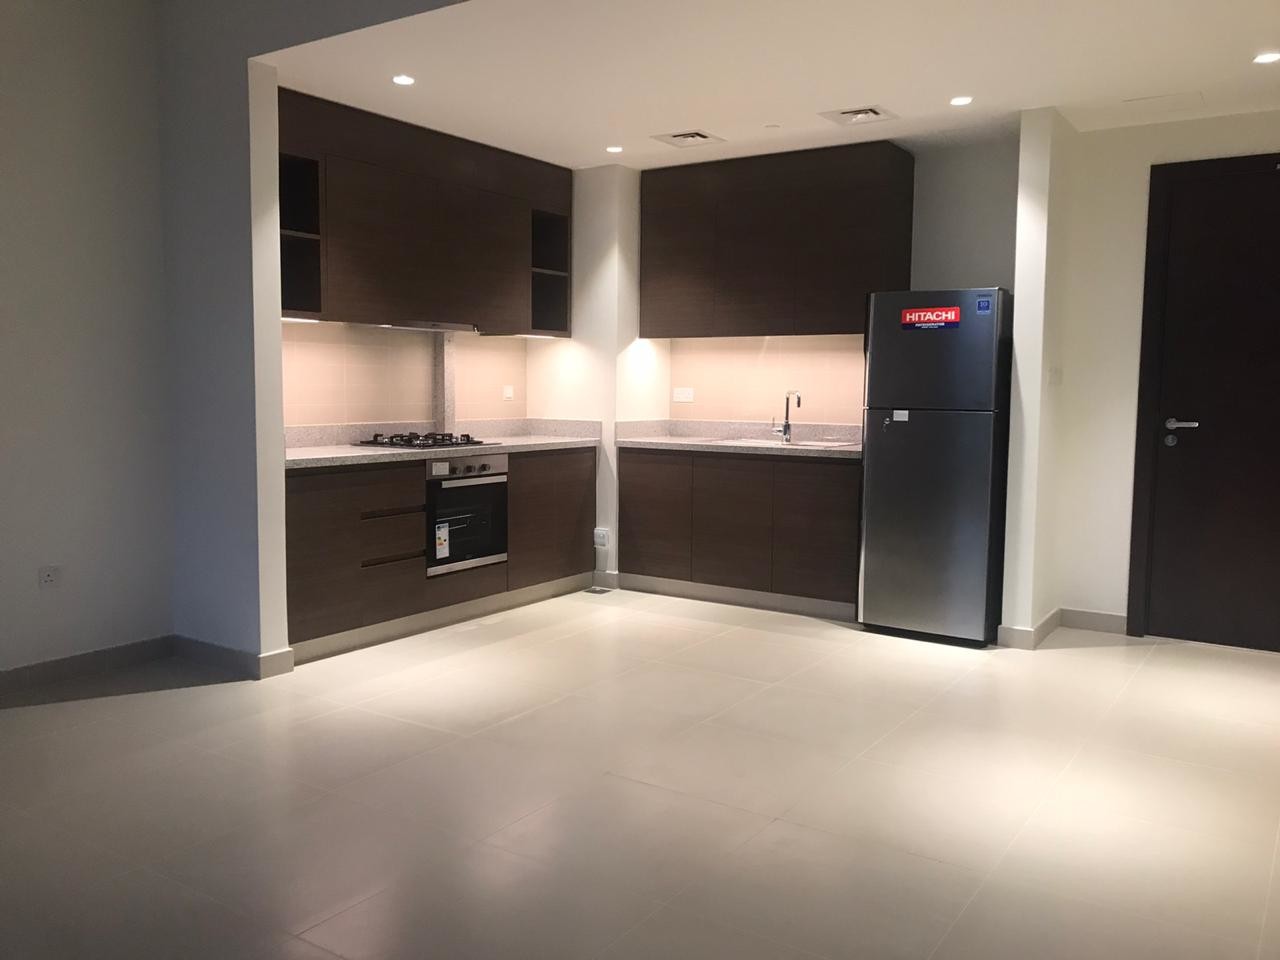 1BR Apartment in Acacia Park Heights